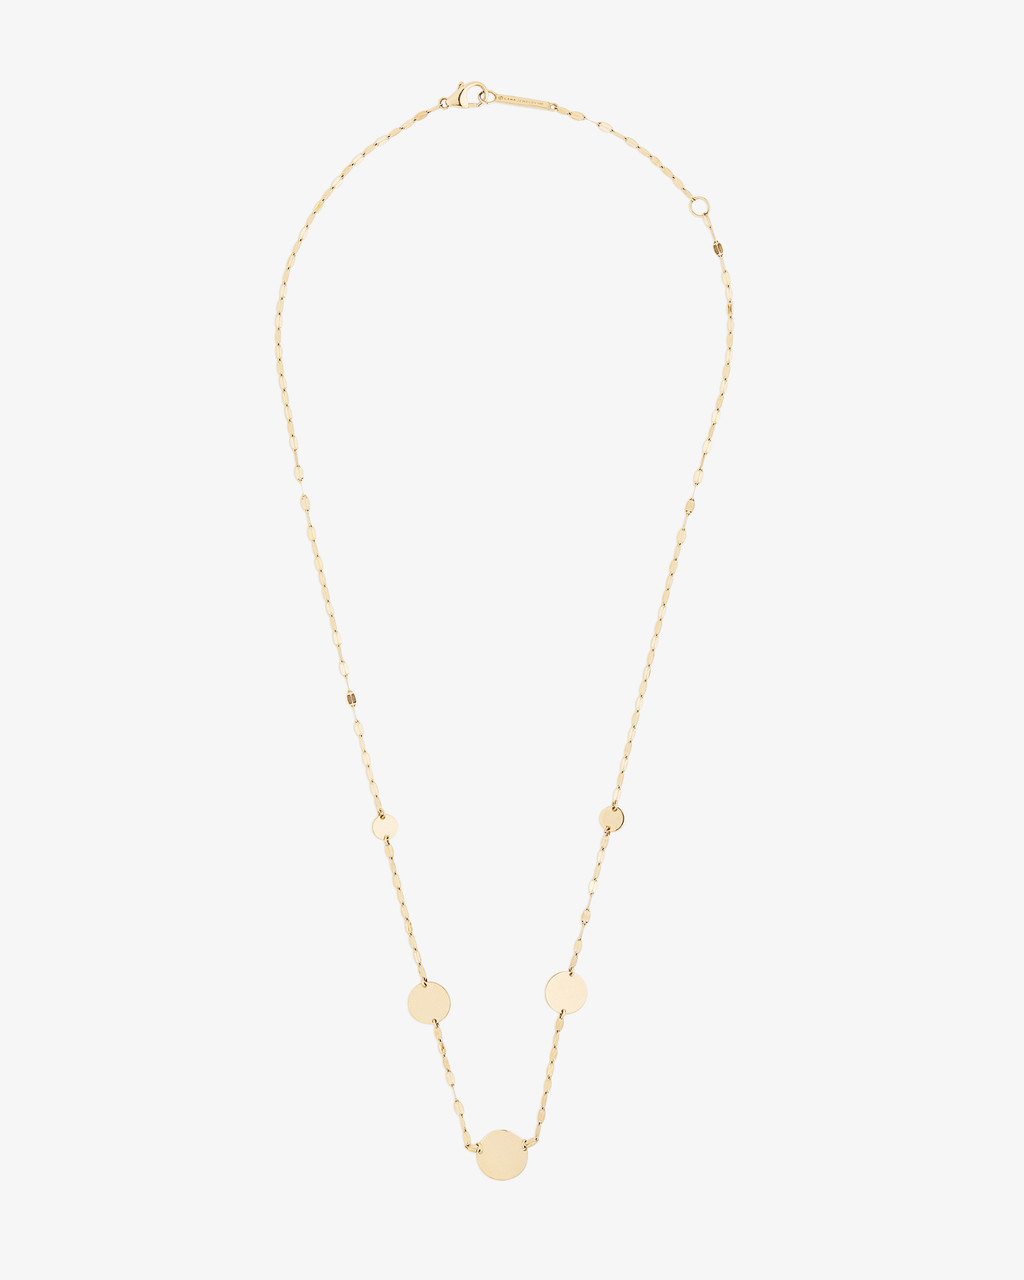 Amazon.com: Allereyae Boho Layered Tube Coin Choker Necklace Tiny Disc  Pendant Necklace Gold Multi Layer Chain Necklace Adjustable Twist Chain  Necklace Chain Jewelry for Women and Girls : Clothing, Shoes & Jewelry